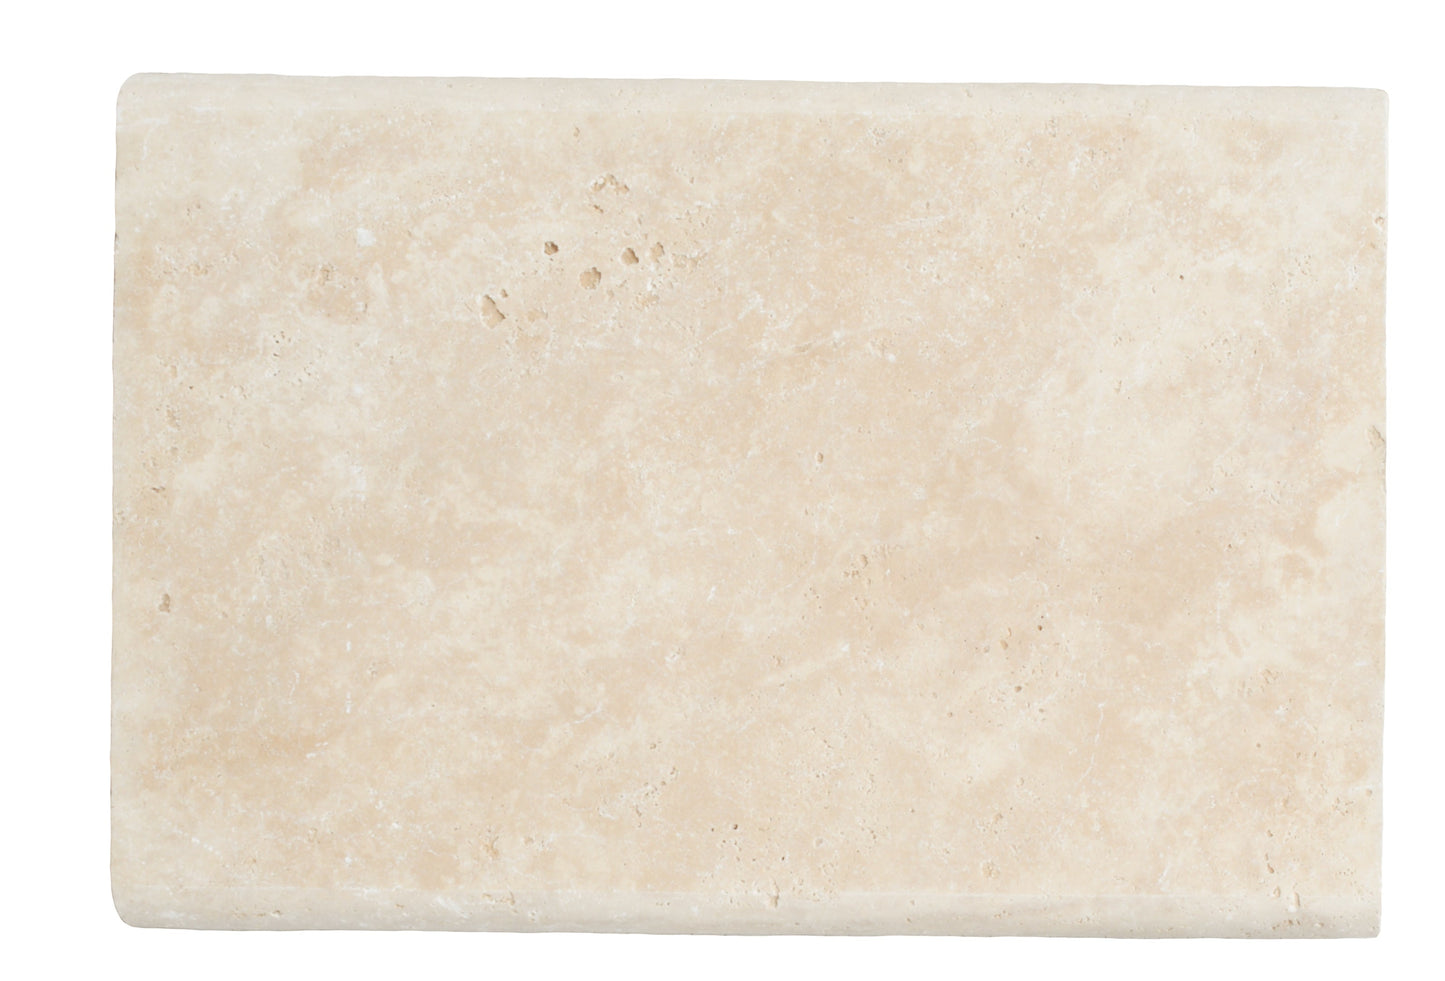 Ivory Travertine Honed Coping Exterior Pool Tile 16X24" 1 1/4"